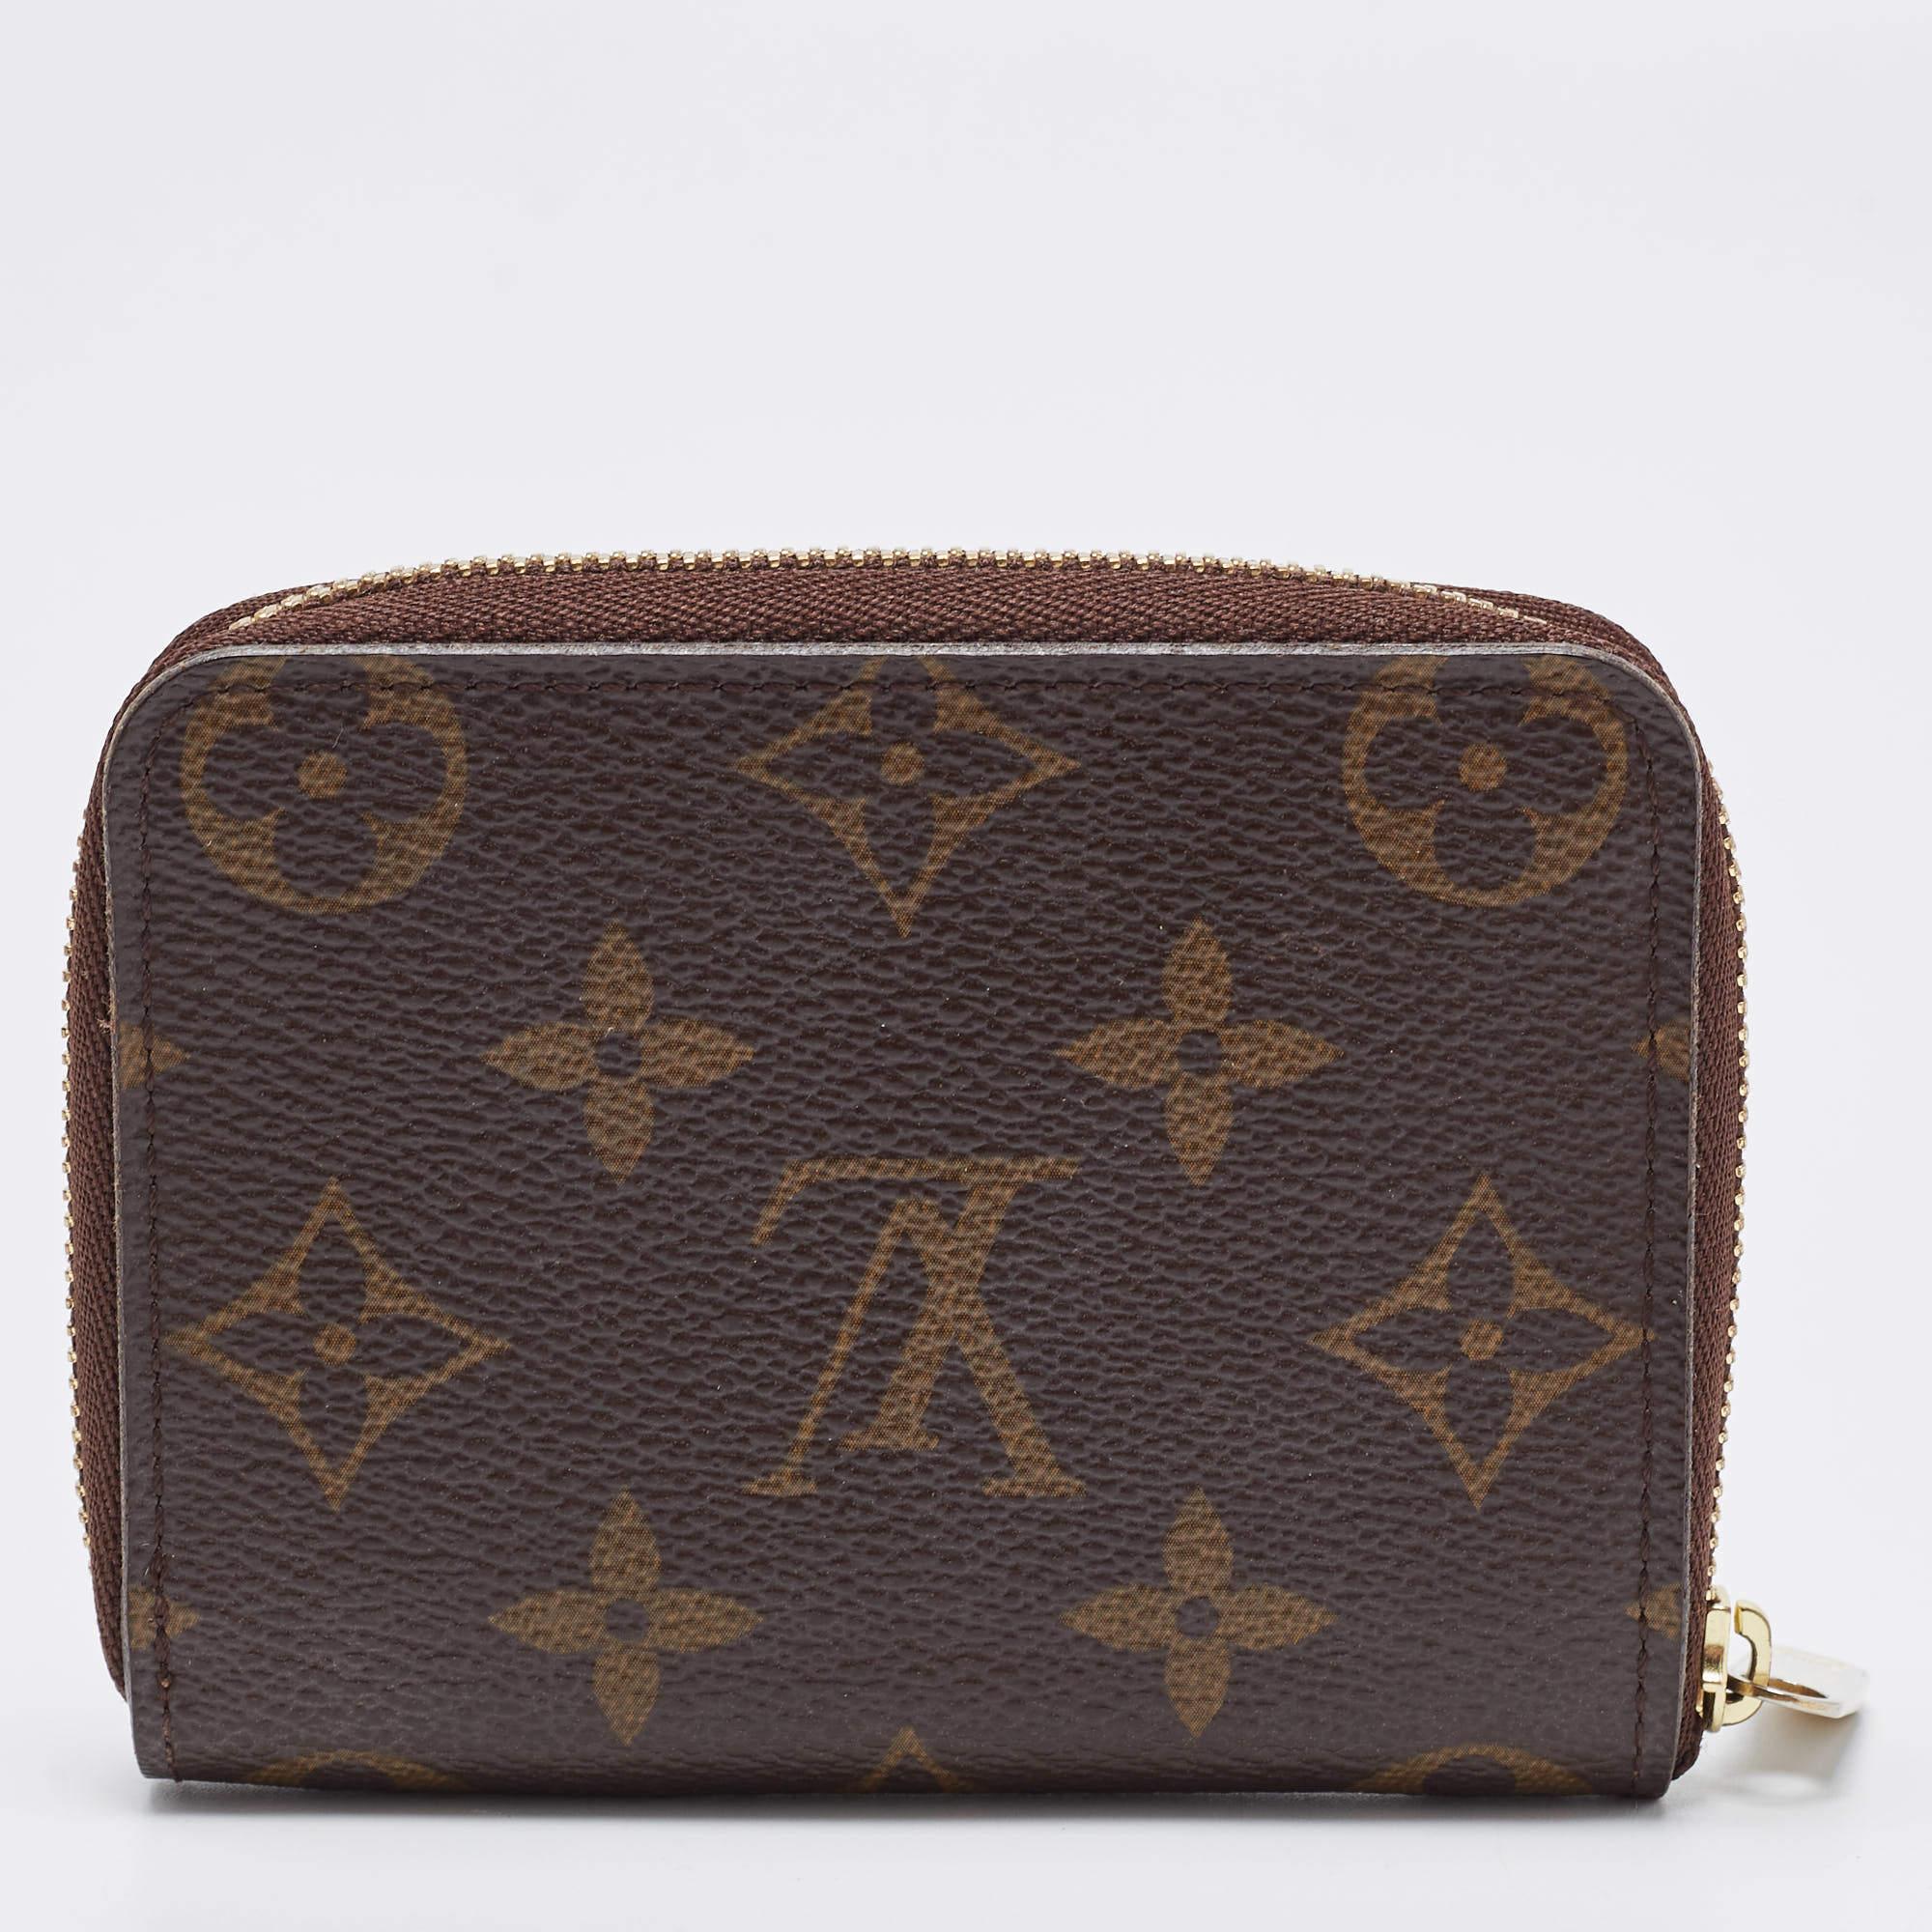 This Louis Vuitton Zippy coinpurse is conveniently designed for everyday use. Crafted from monogram coated canvas, the wallet has a zip closure which opens to reveal multiple slots for you to neatly arrange your cards and coins.

